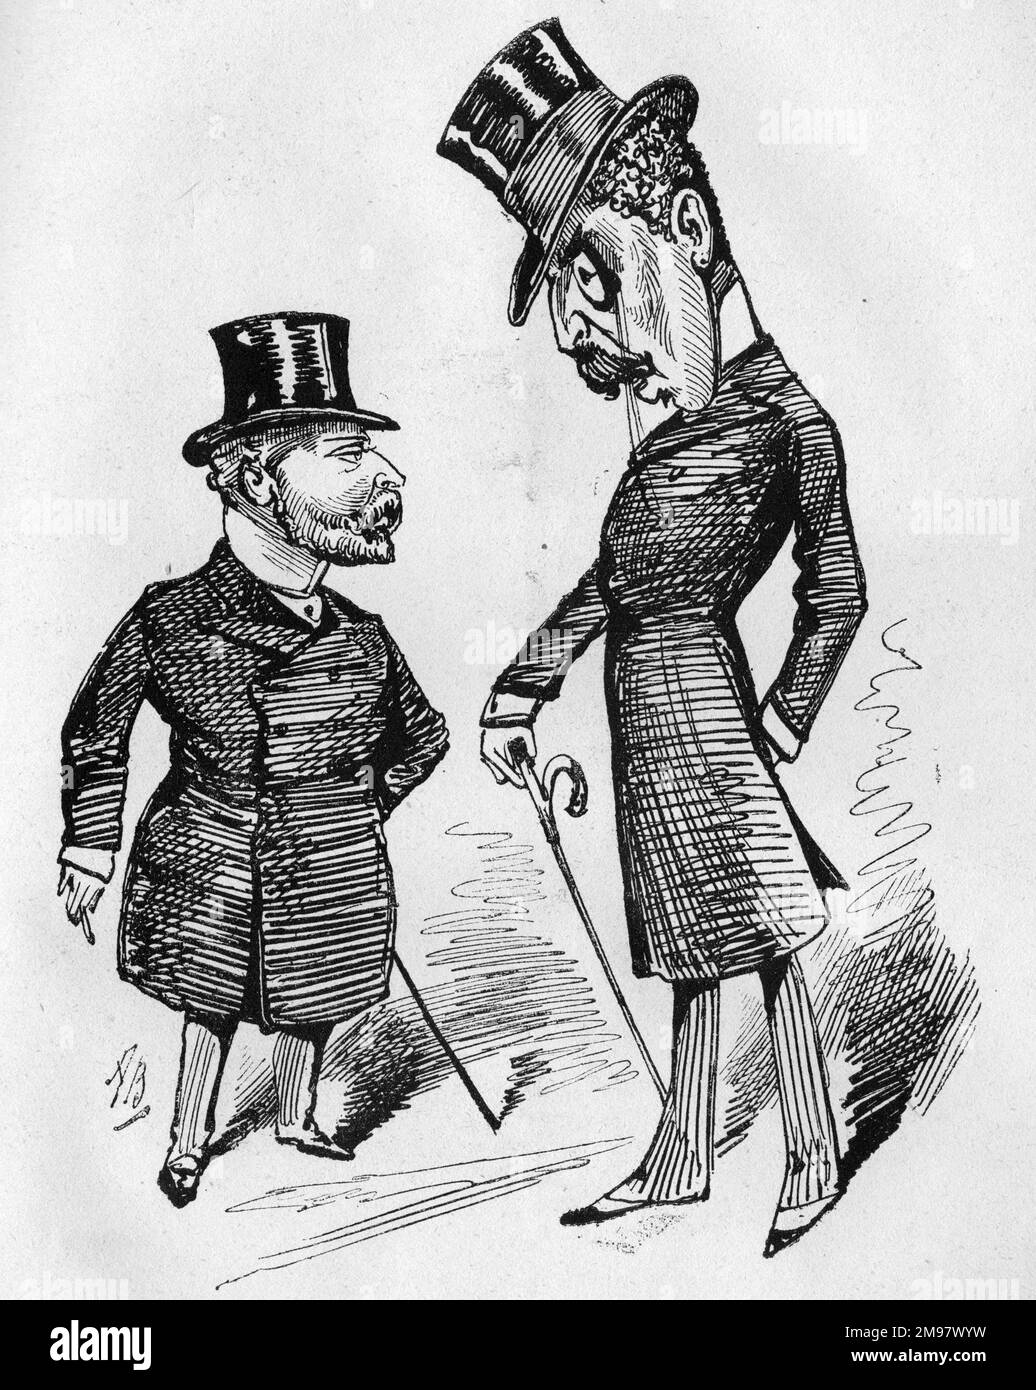 Cartoon of Edward, Prince of Wales (later Edward VII) and Sir Squire Bancroft (1841-1926), English actor-manager.  Bancroft speaks condescendingly to the Prince, saying he could introduce him to a few people in due course. Stock Photo